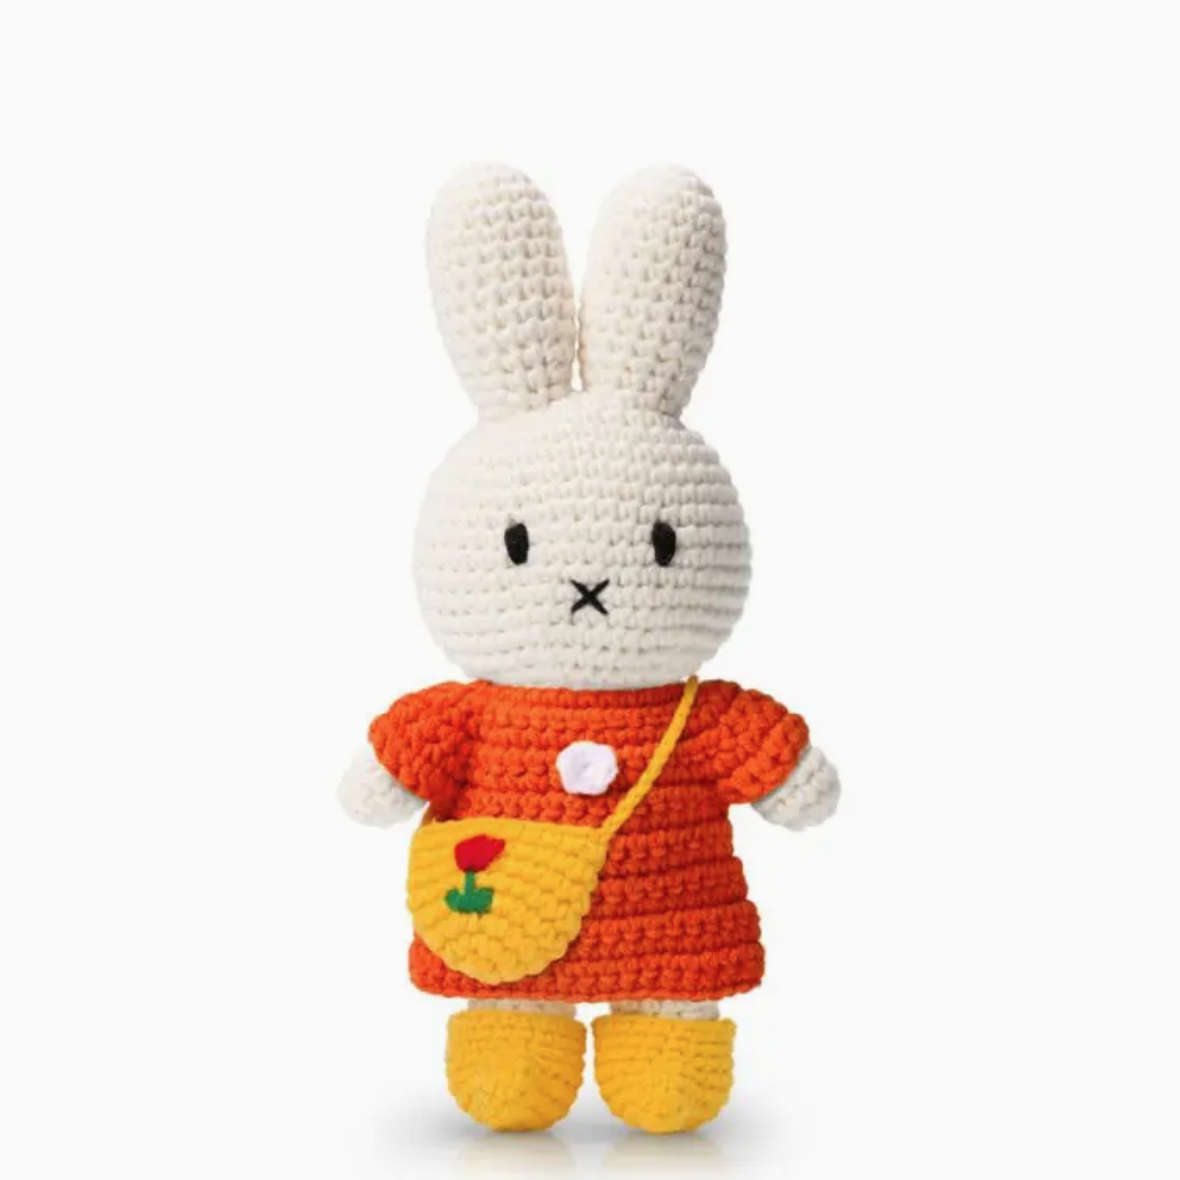 Miffy and Her Tulip Bag Handmade Crocheted Soft Toy